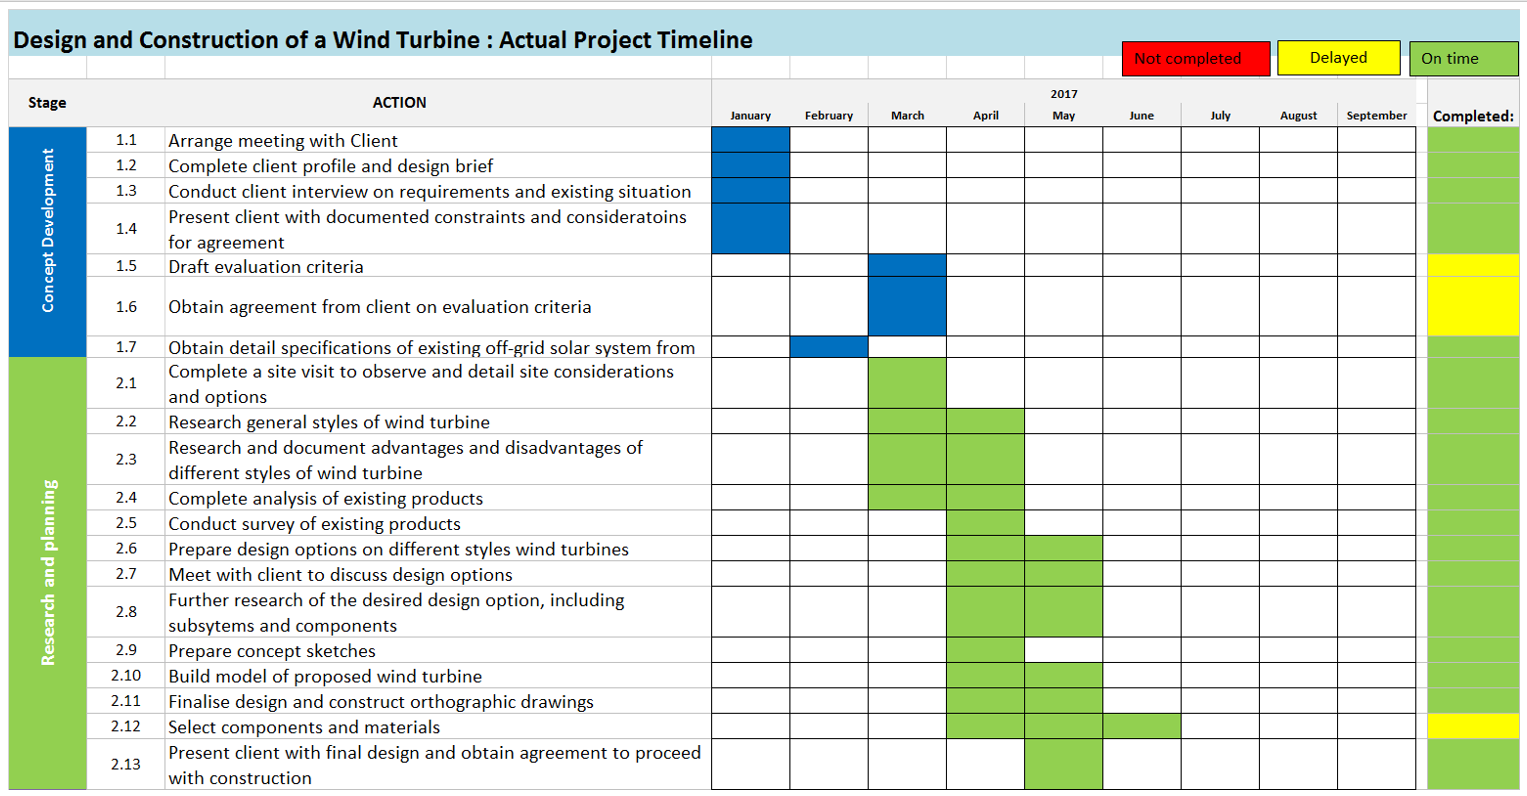 Project Timeline - SYSTEMS ENGINEERING FOLIO